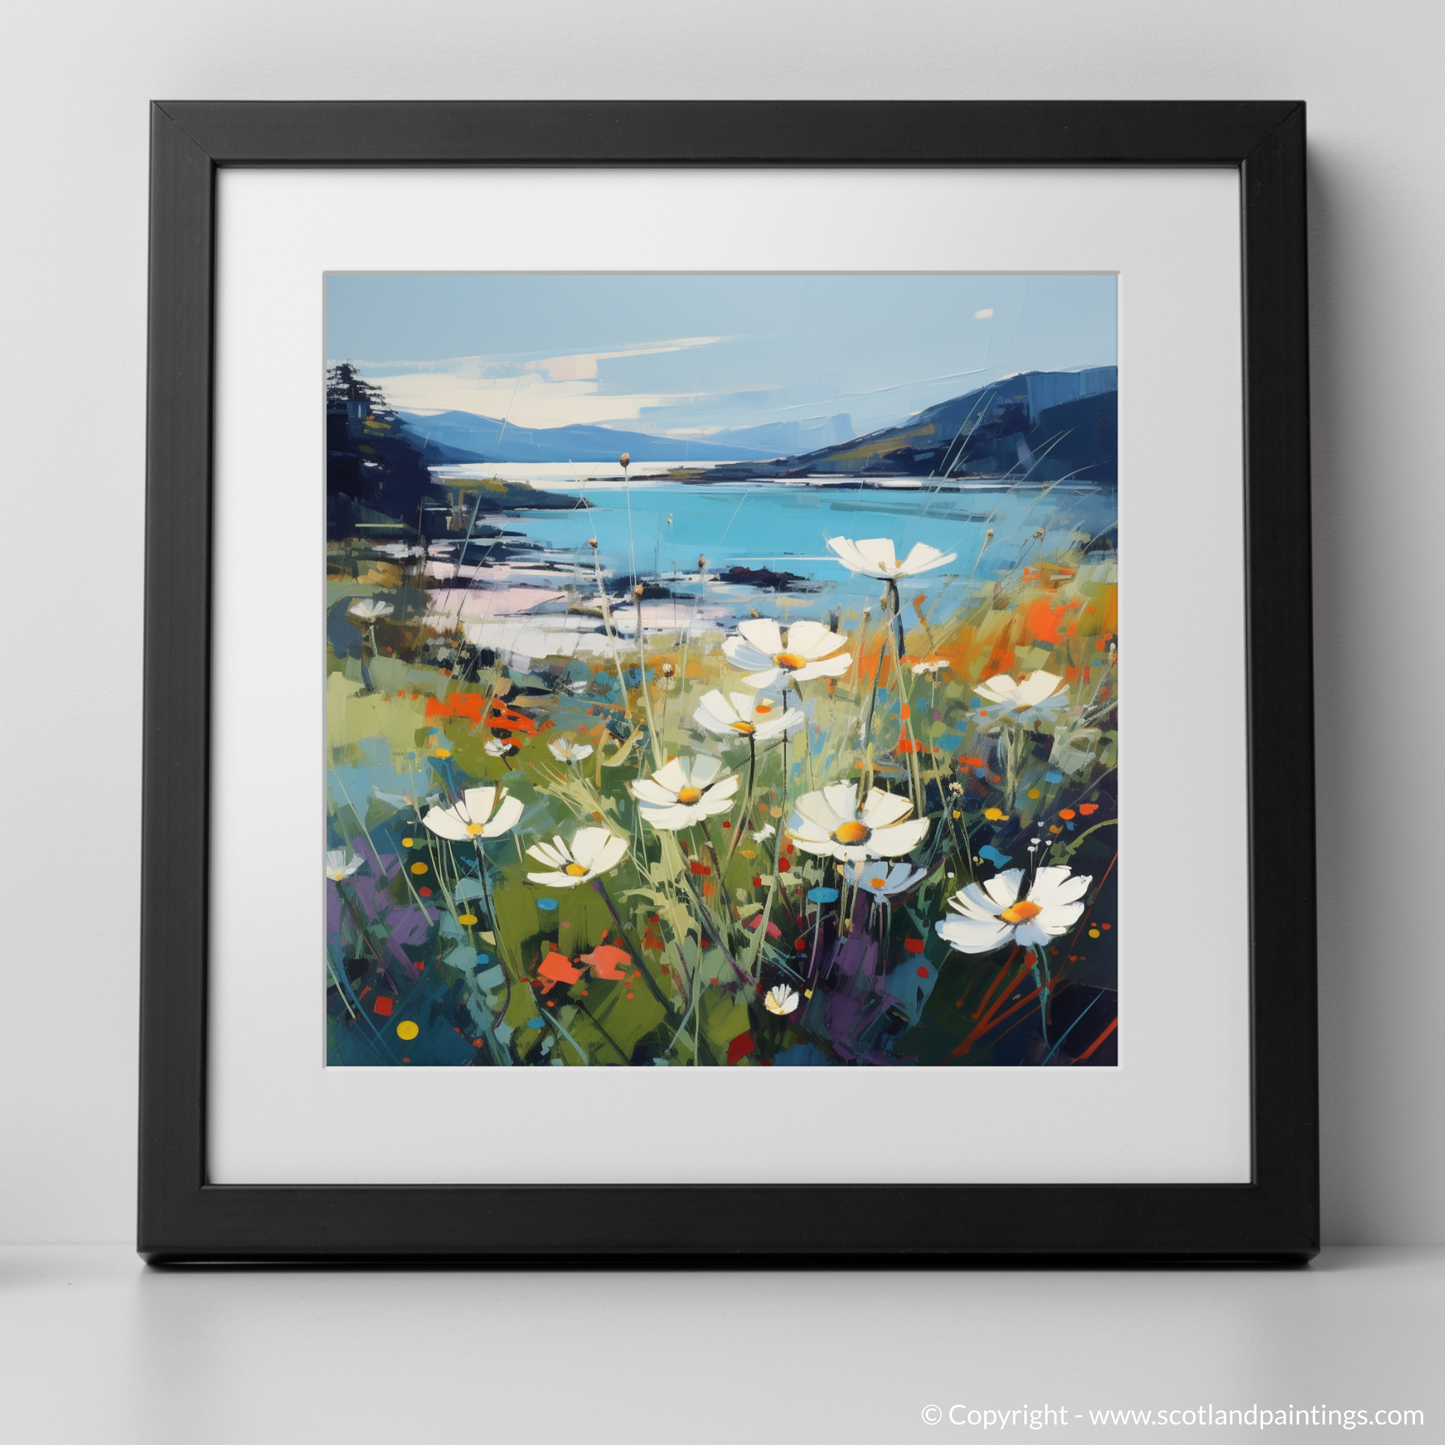 Art Print of Wildflowers by Loch Lomond with a black frame